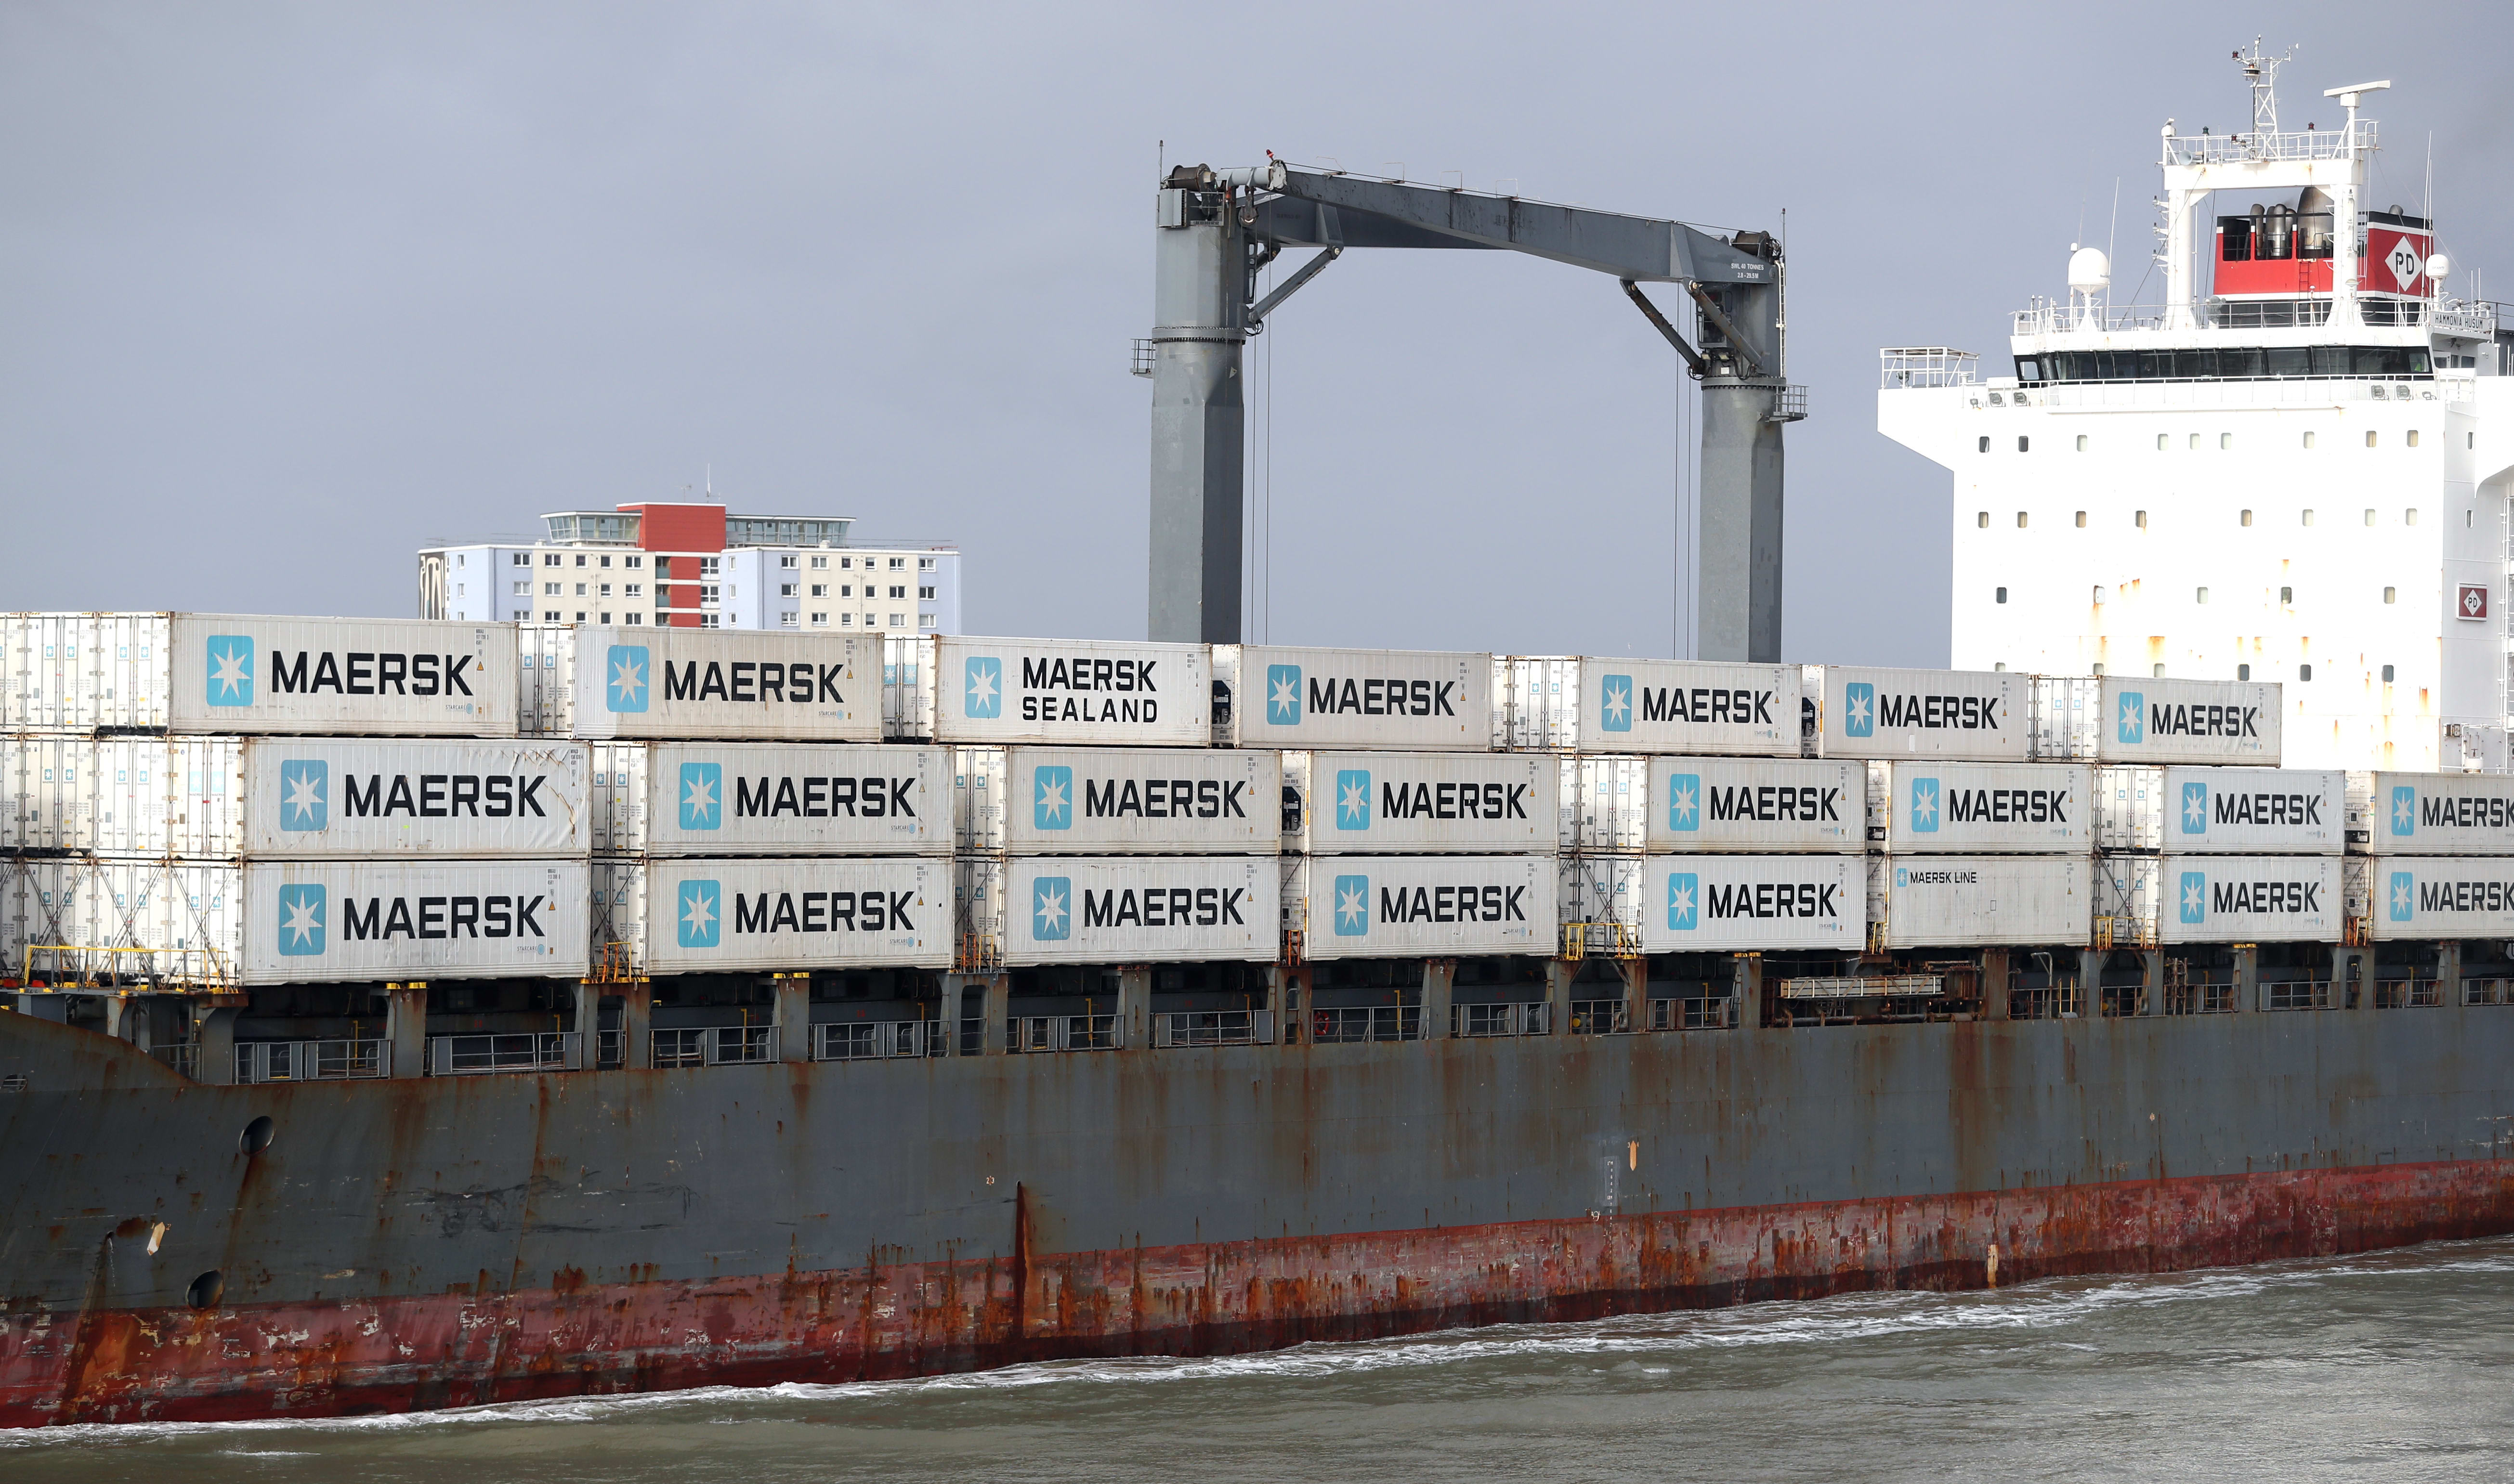 Maersk, Orsted and other Danish companies team up to produce sustainable fuels on a large scale